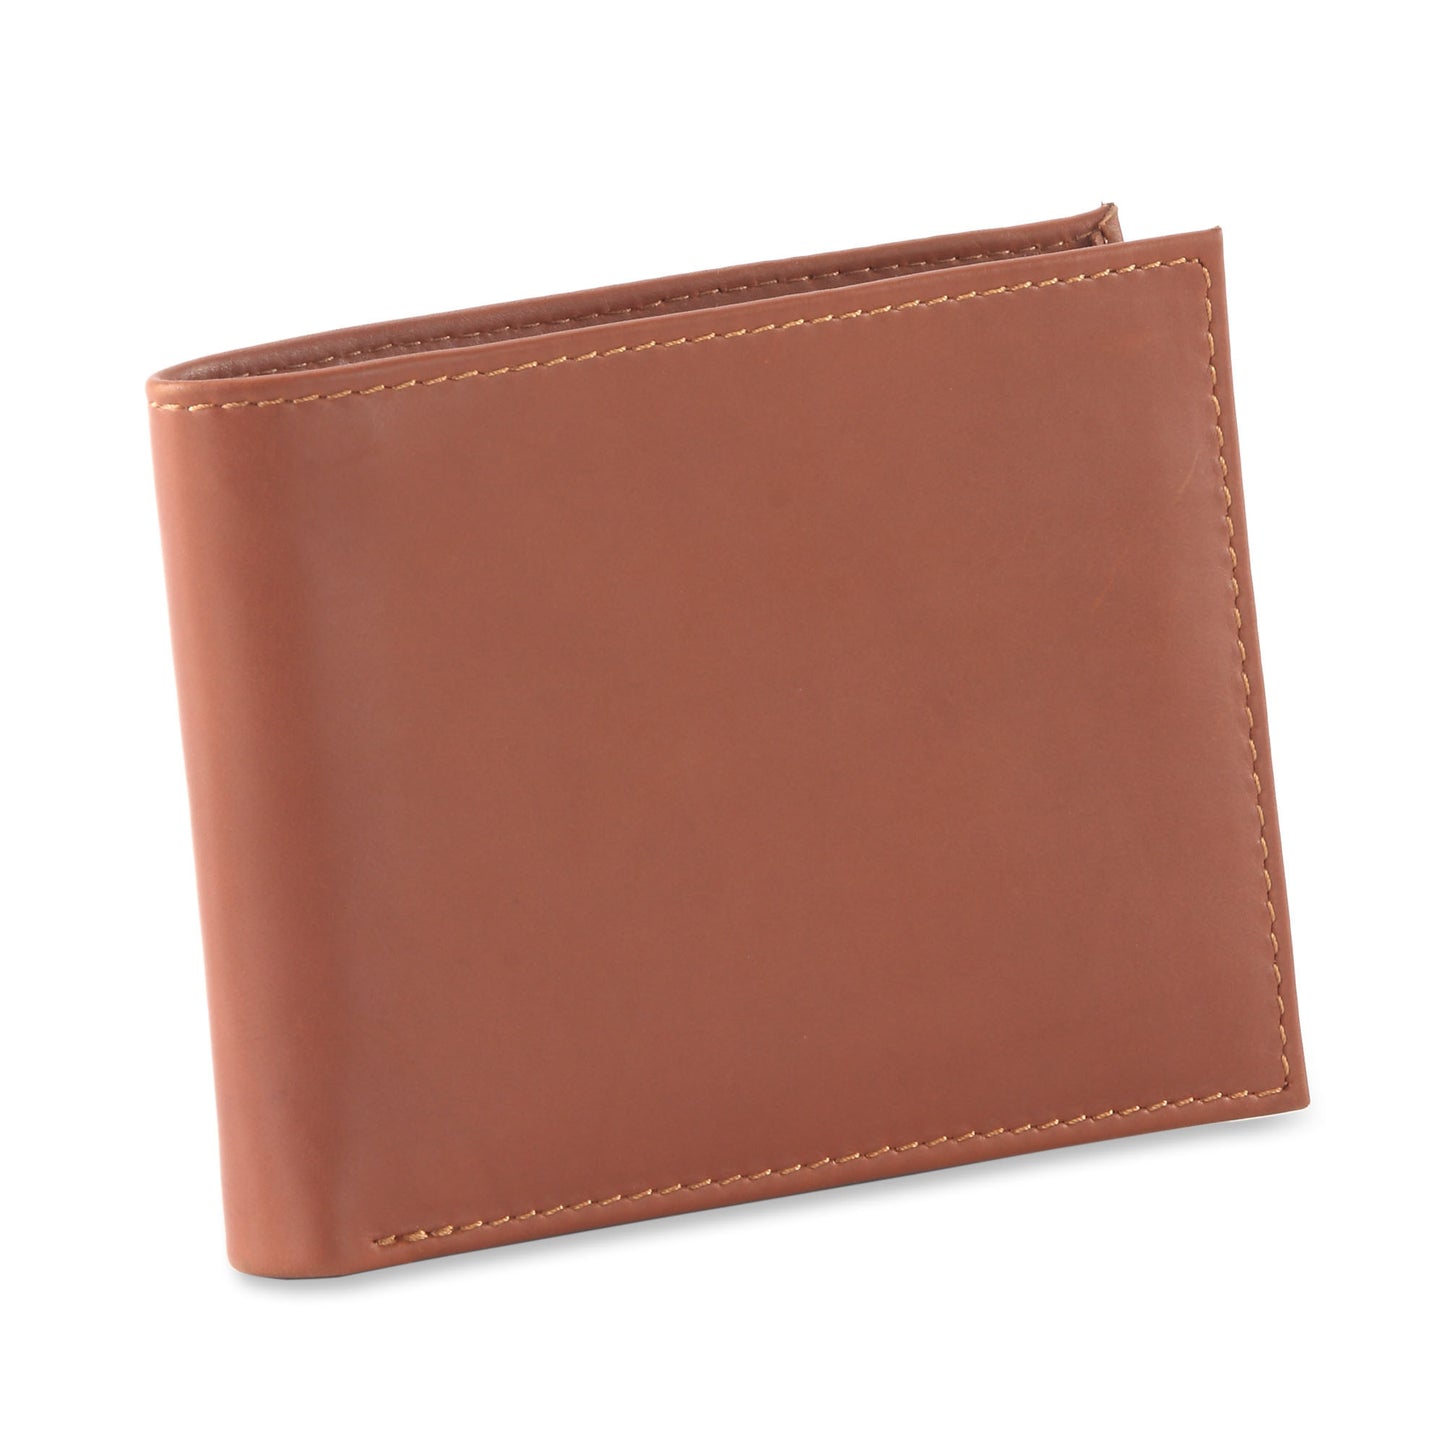 Style n Craft 200161 bifold wallet with center flap in tan color leather - closed view